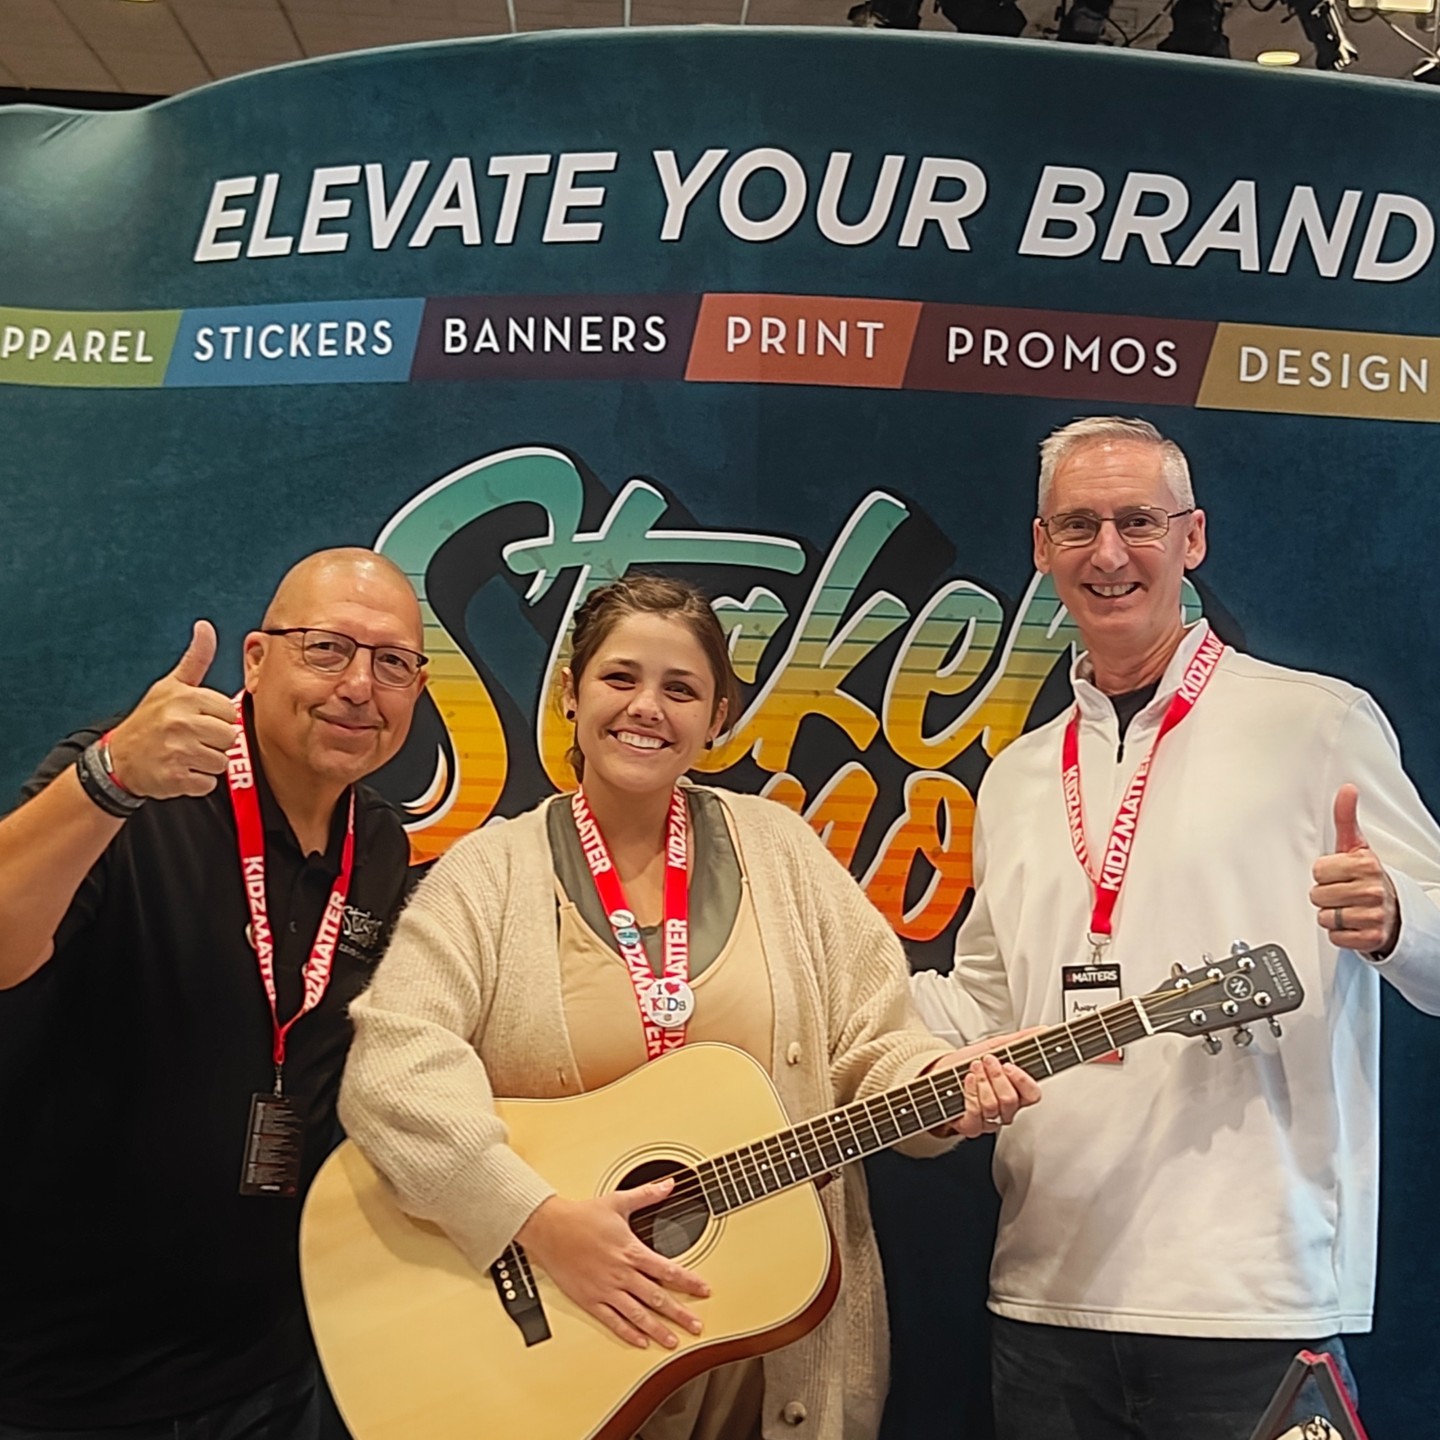 Congrats to London Calvary Chapel Lake of the Ozark Children's Director on winning the guitar giveaway at the Kidzmatter Conference. We love seeing happy faces at our booth. 
Pictured are Ed, London and Andy. So glad to see all of you.
#happyfaces #calvarychapel #guitargiveaway #churchesaroundtheworld #winner #churchlife #winnerswin #kidzmatter2023